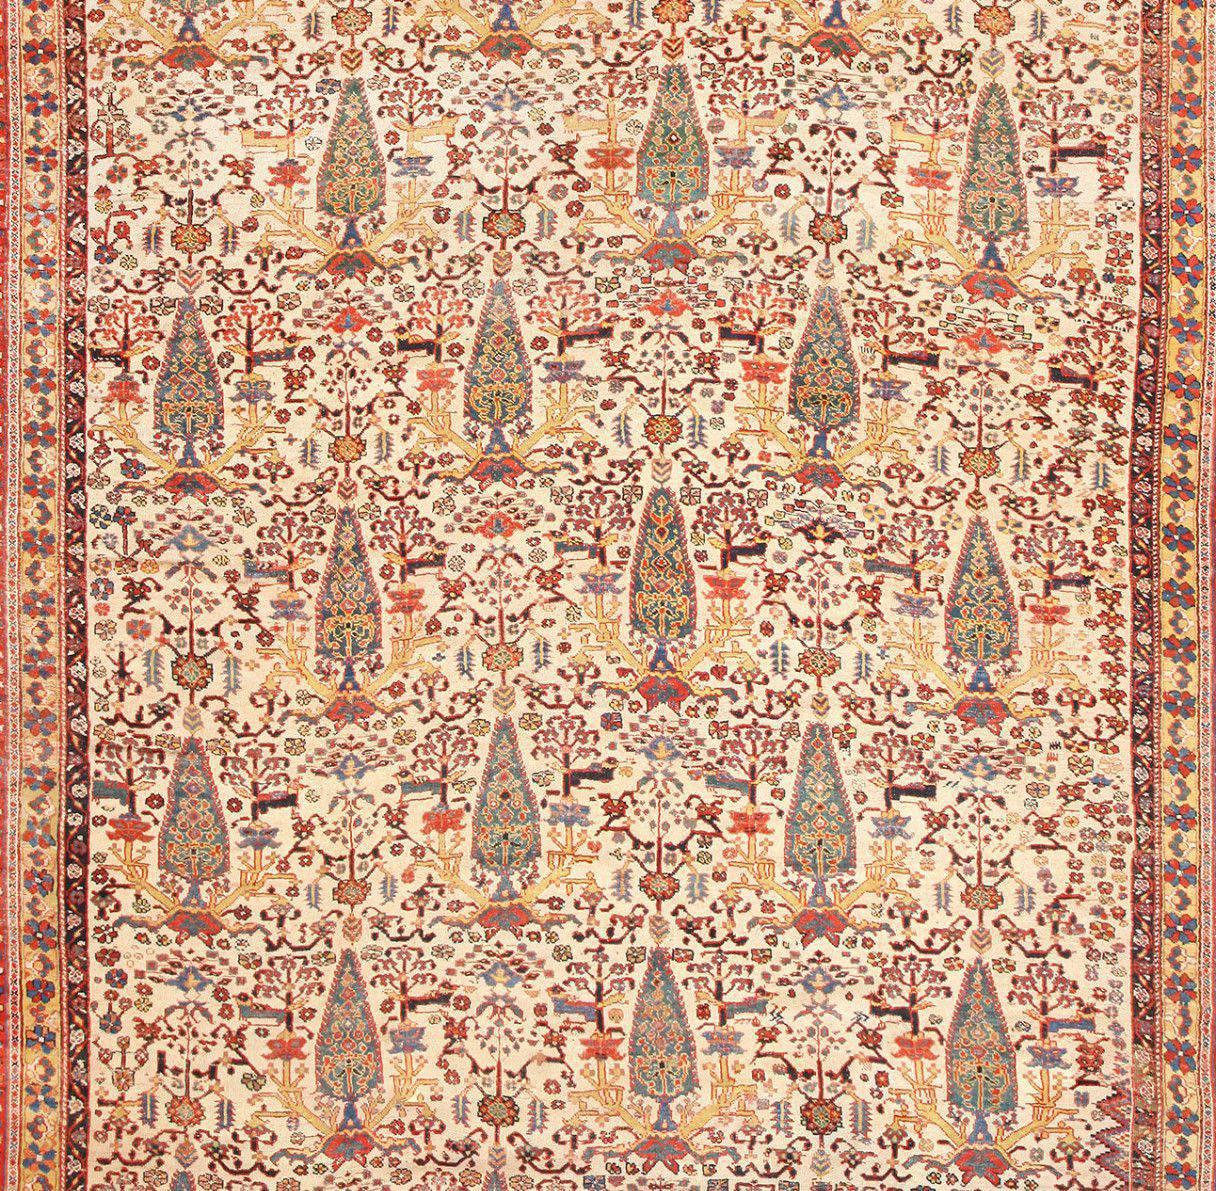 Hand-Knotted Large Antique Persian Qashqai Rug. Size: 12 ft 8 in x 24 ft (3.86 m x 7.32 m)